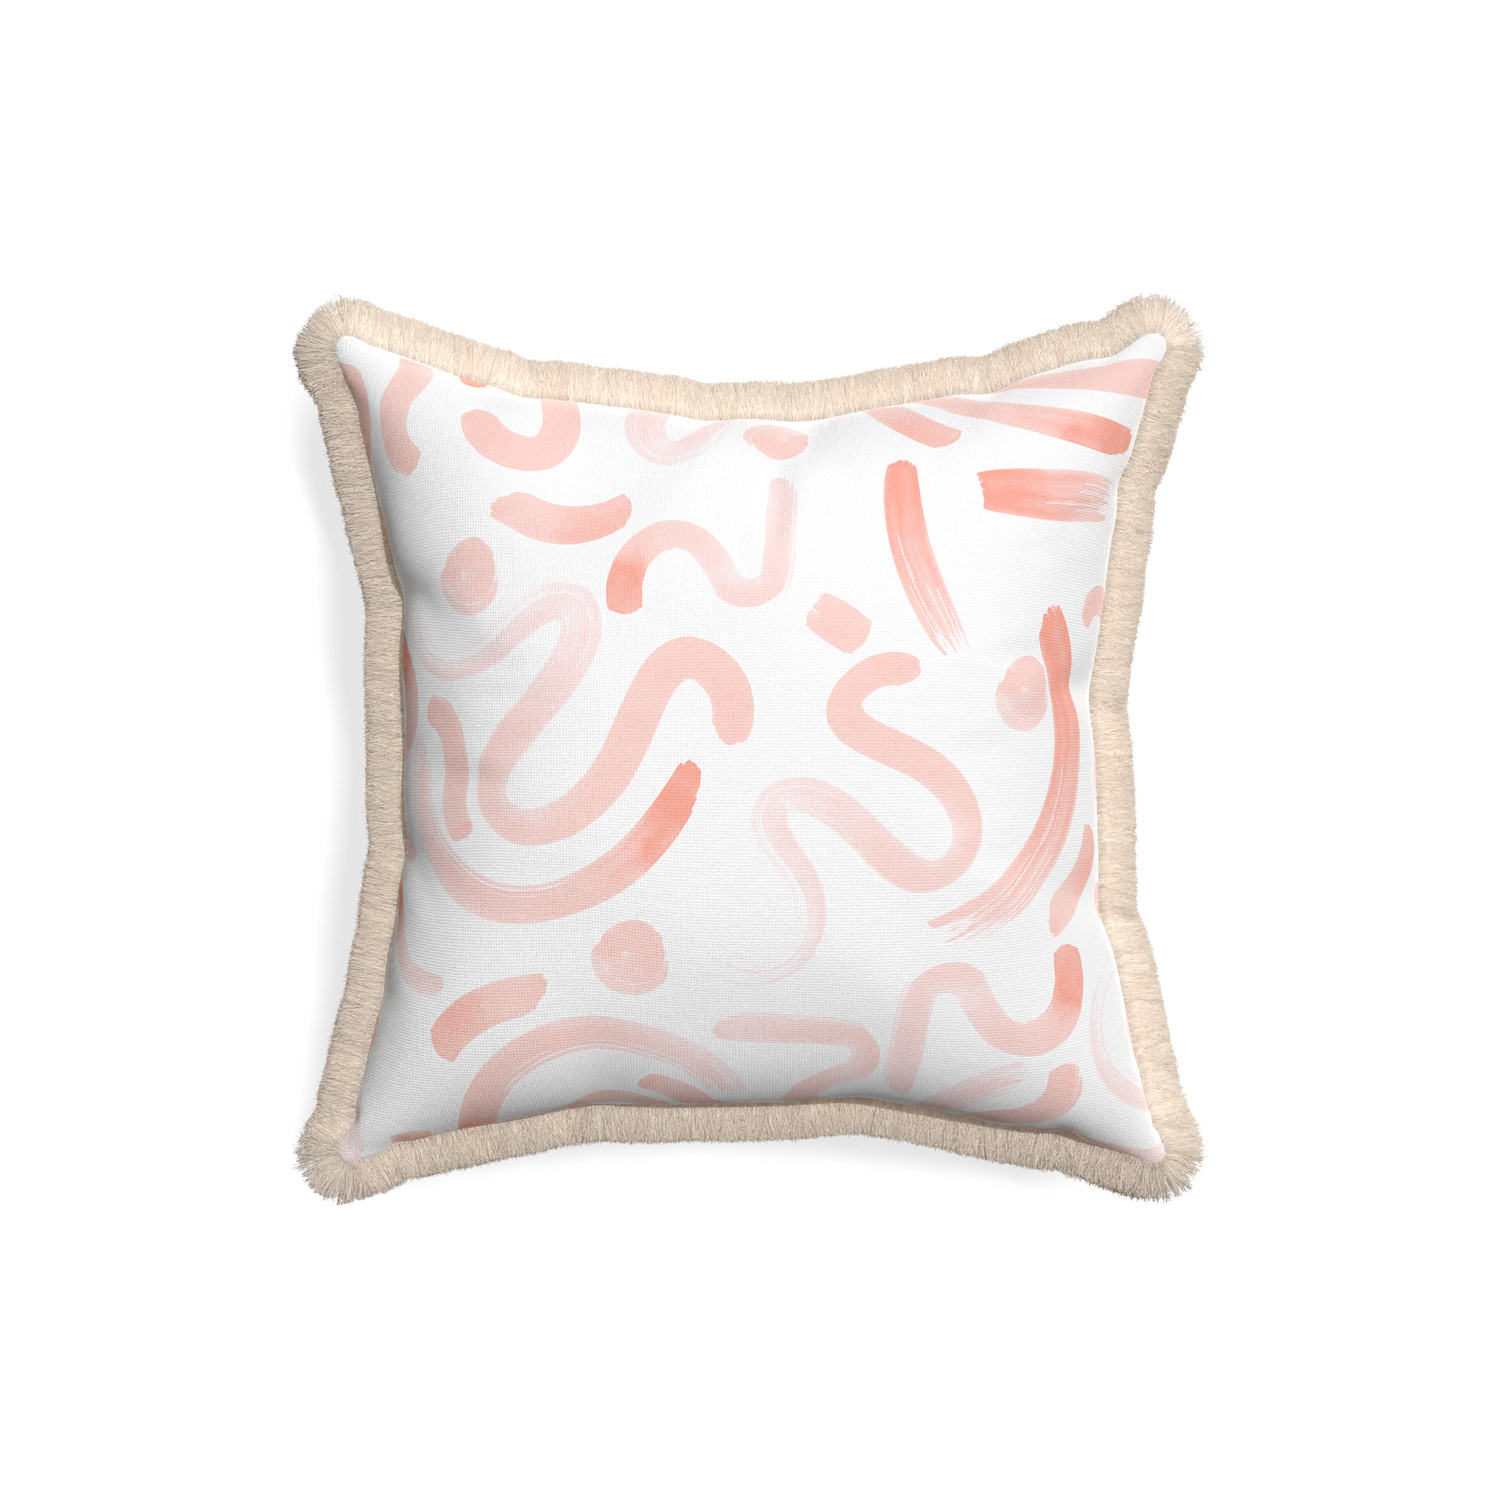 18-square hockney pink custom pink graphicpillow with cream fringe on white background